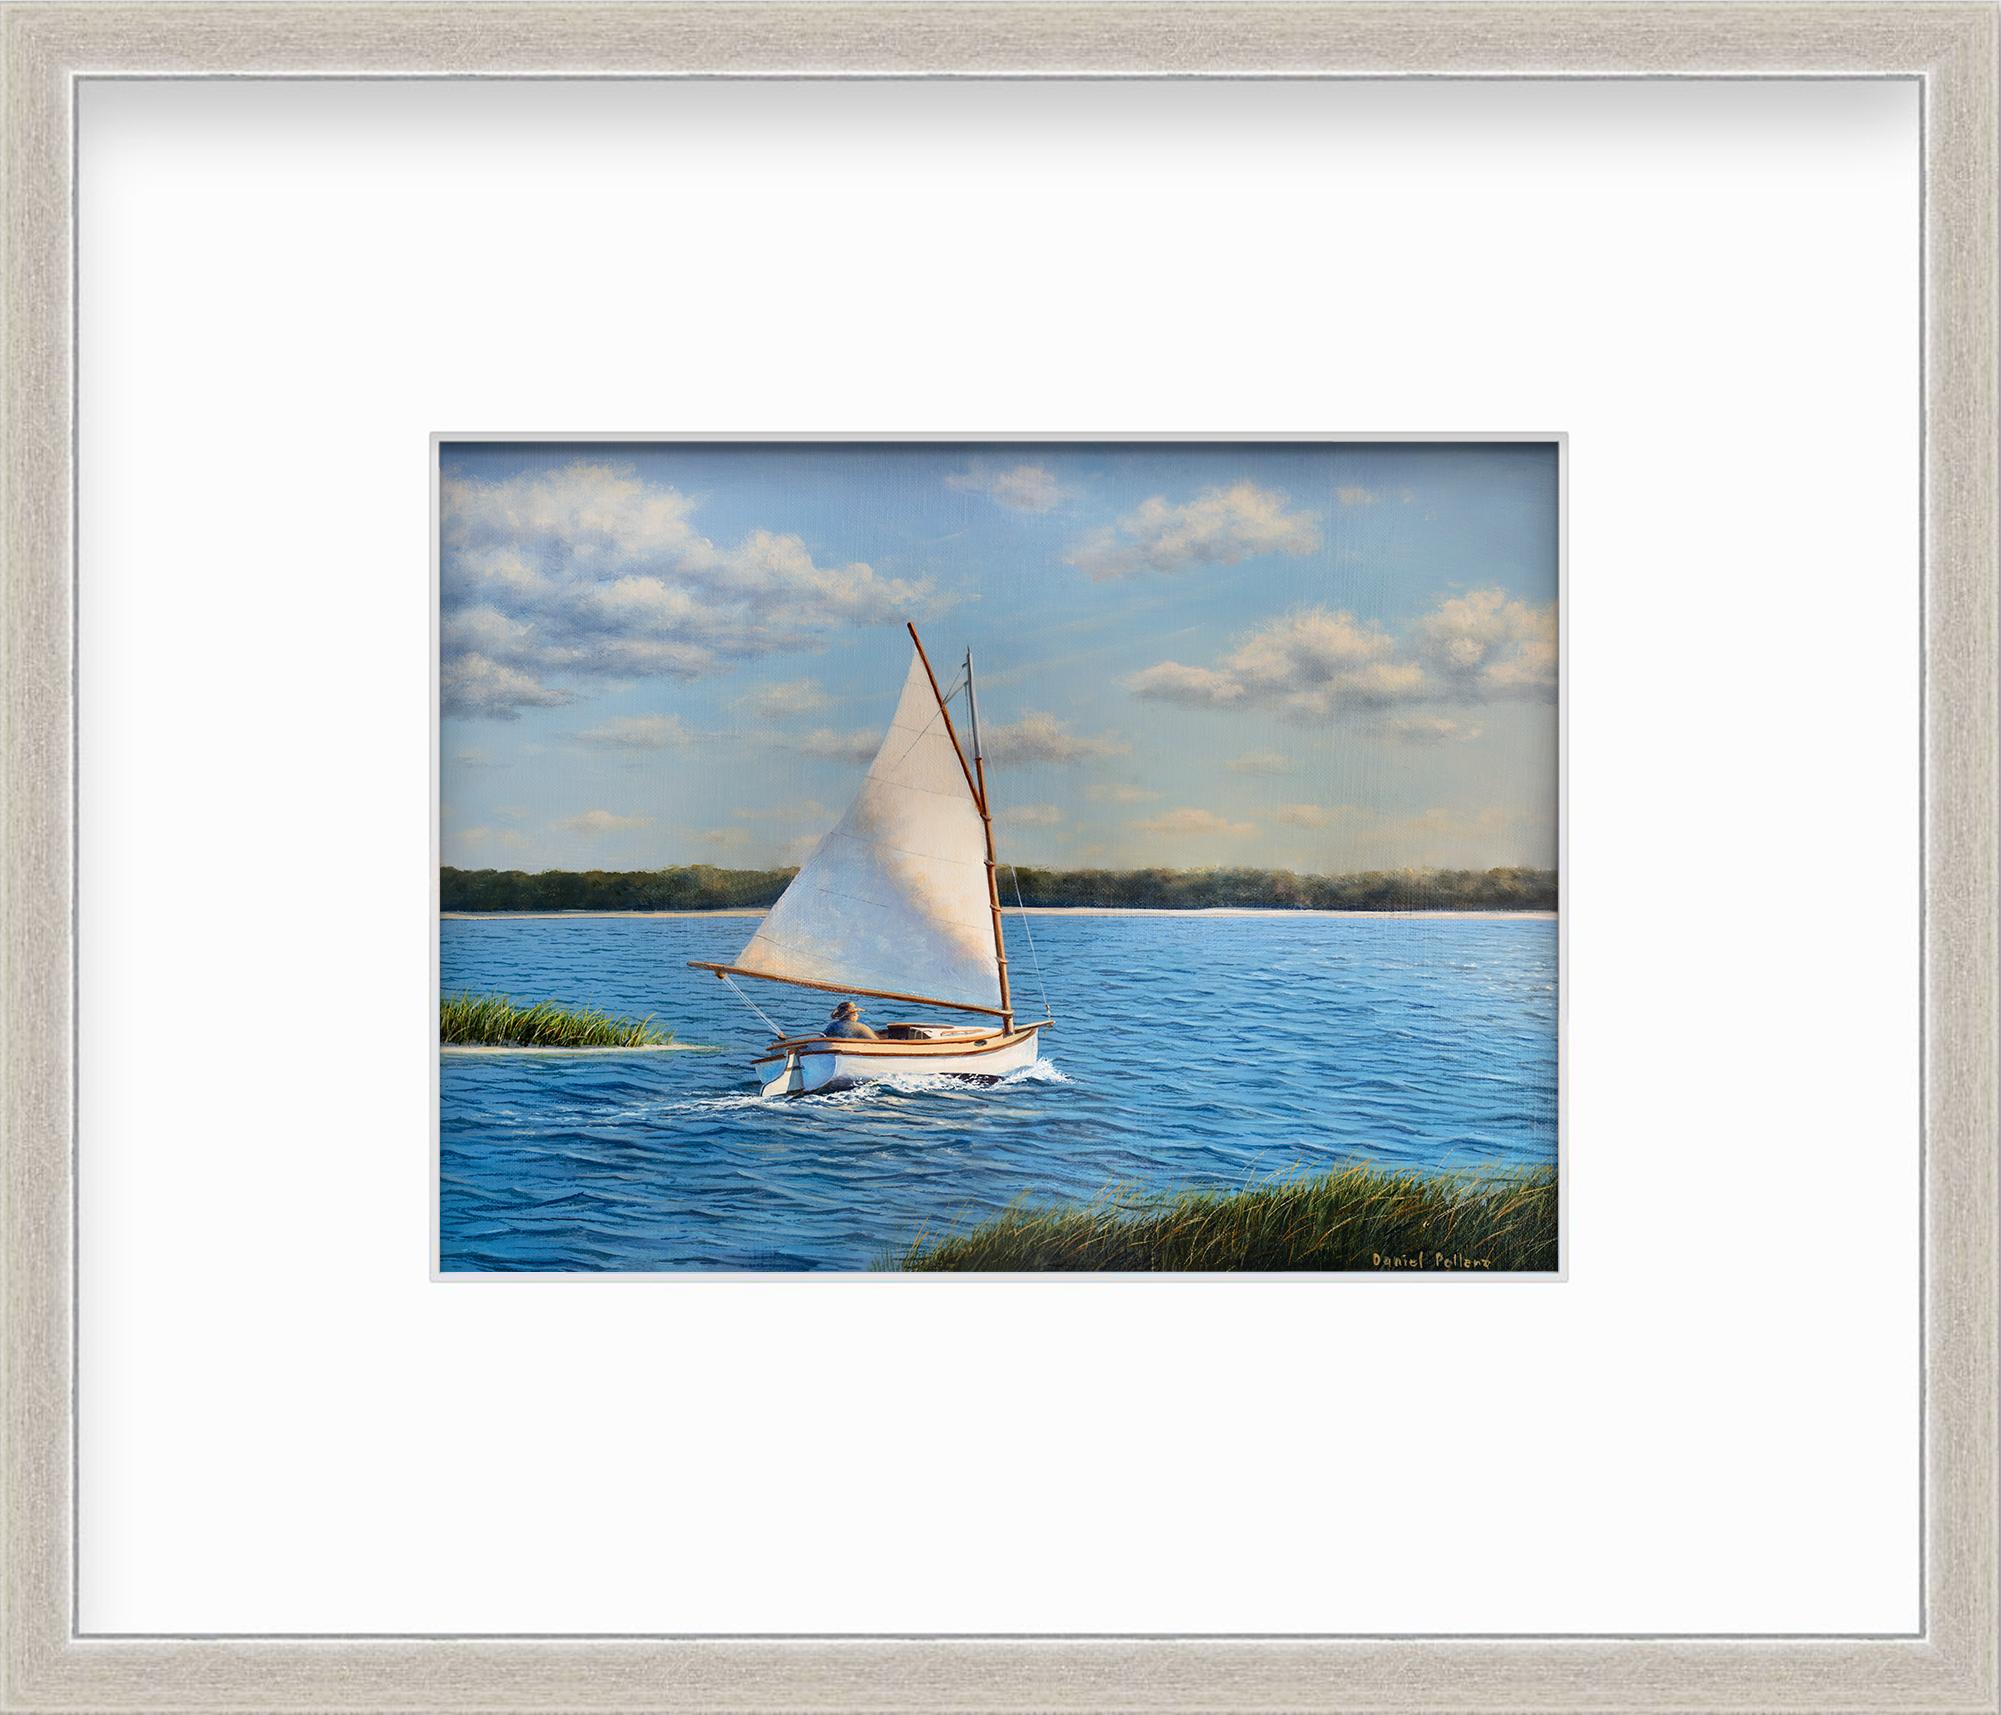 Daniel Pollera Landscape Print - "Sailing Out to the Bay, " Framed Limited Edition Print, 8" x 12"